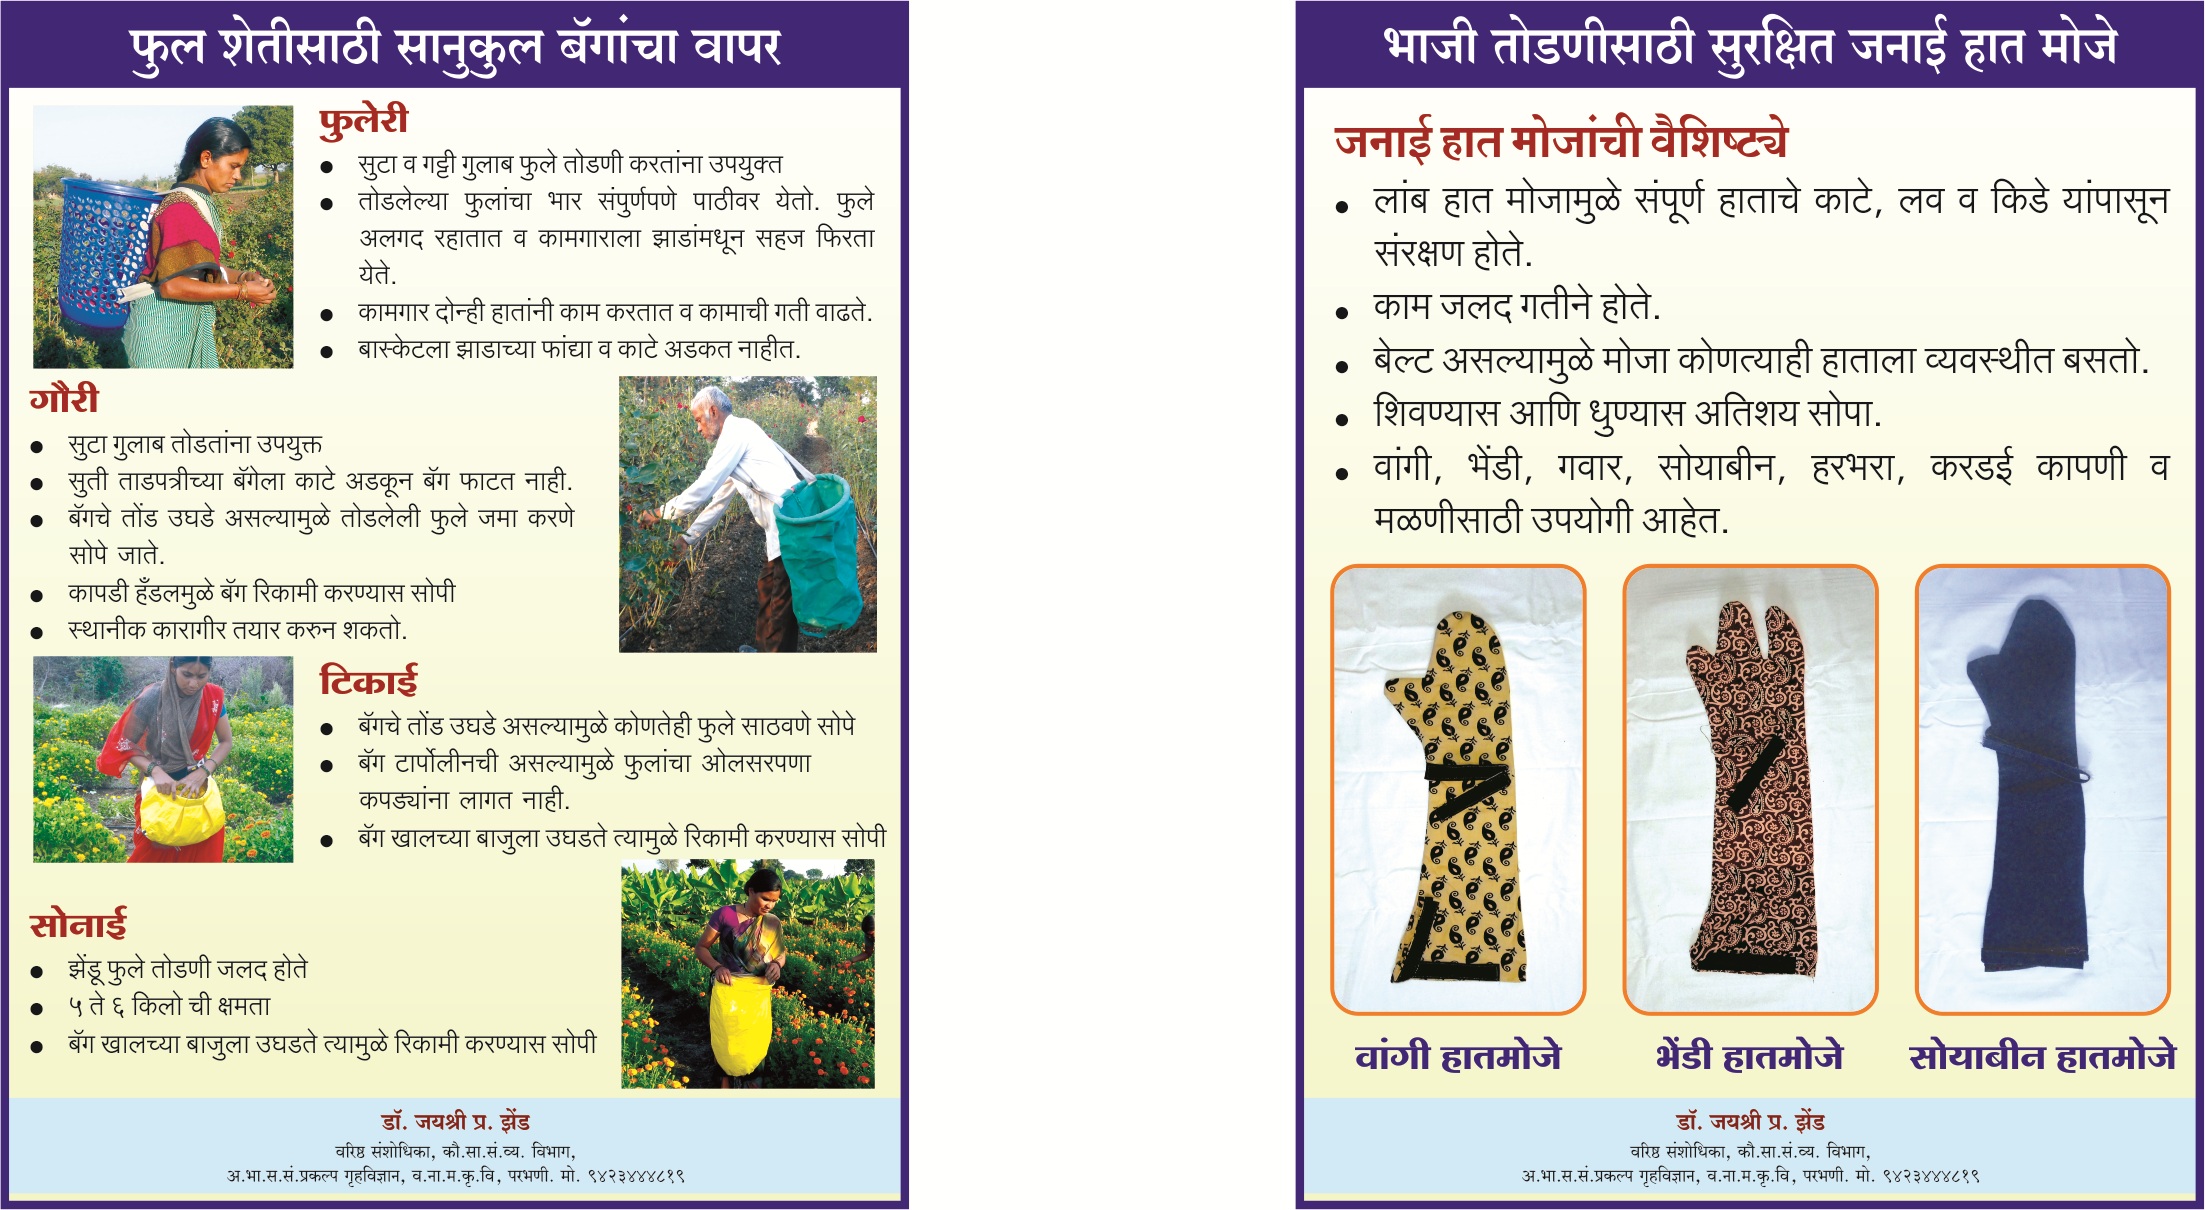 Two Technologies For Farmers - VNMKV PARBHANI